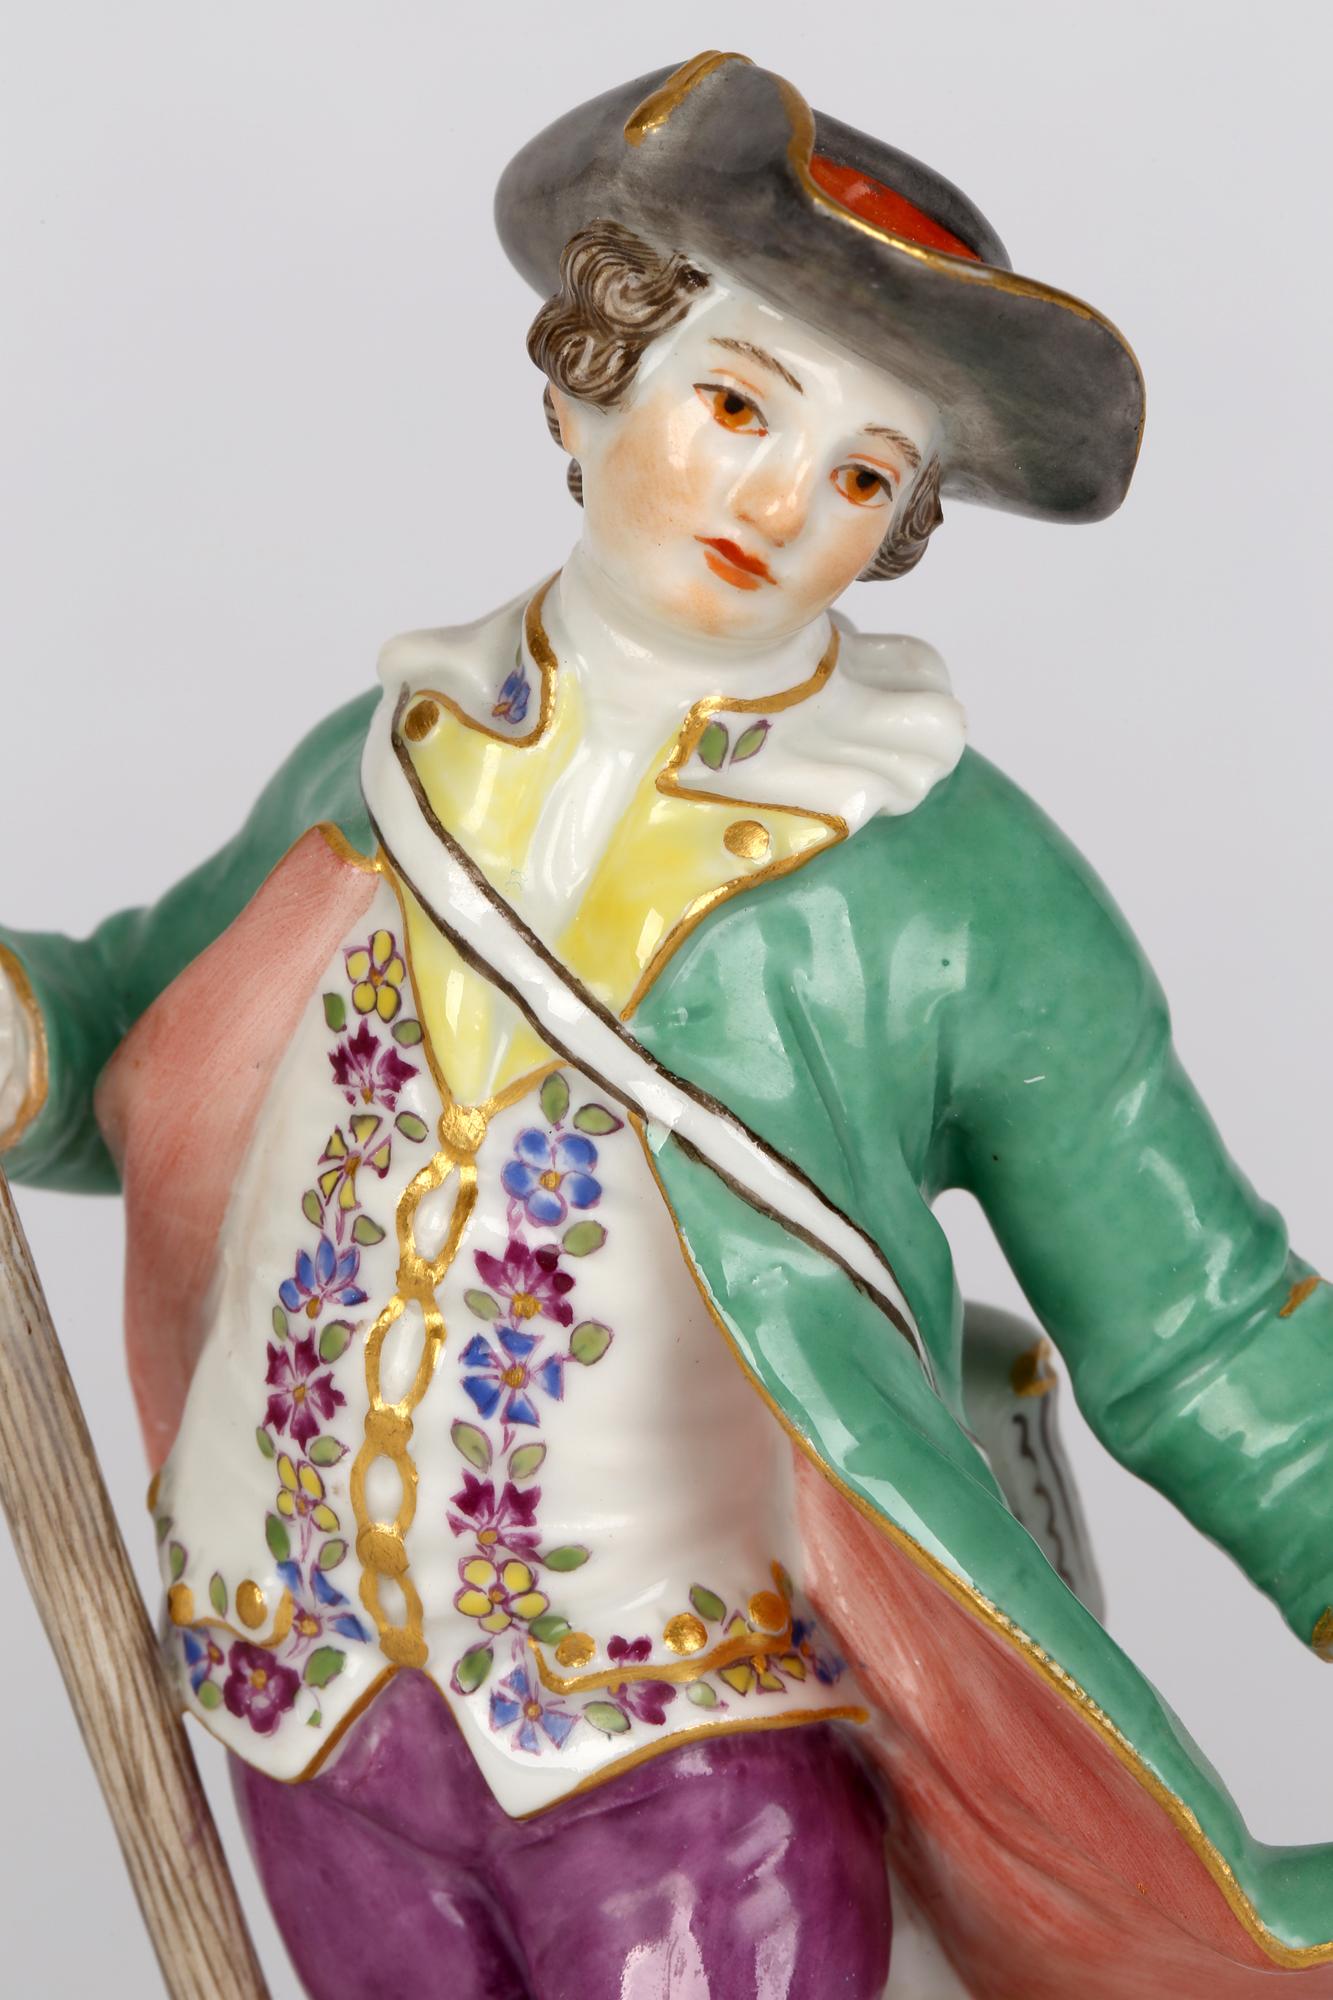 Hand-Painted Meissen Porcelain Figure of a Boy with Wooden Staff